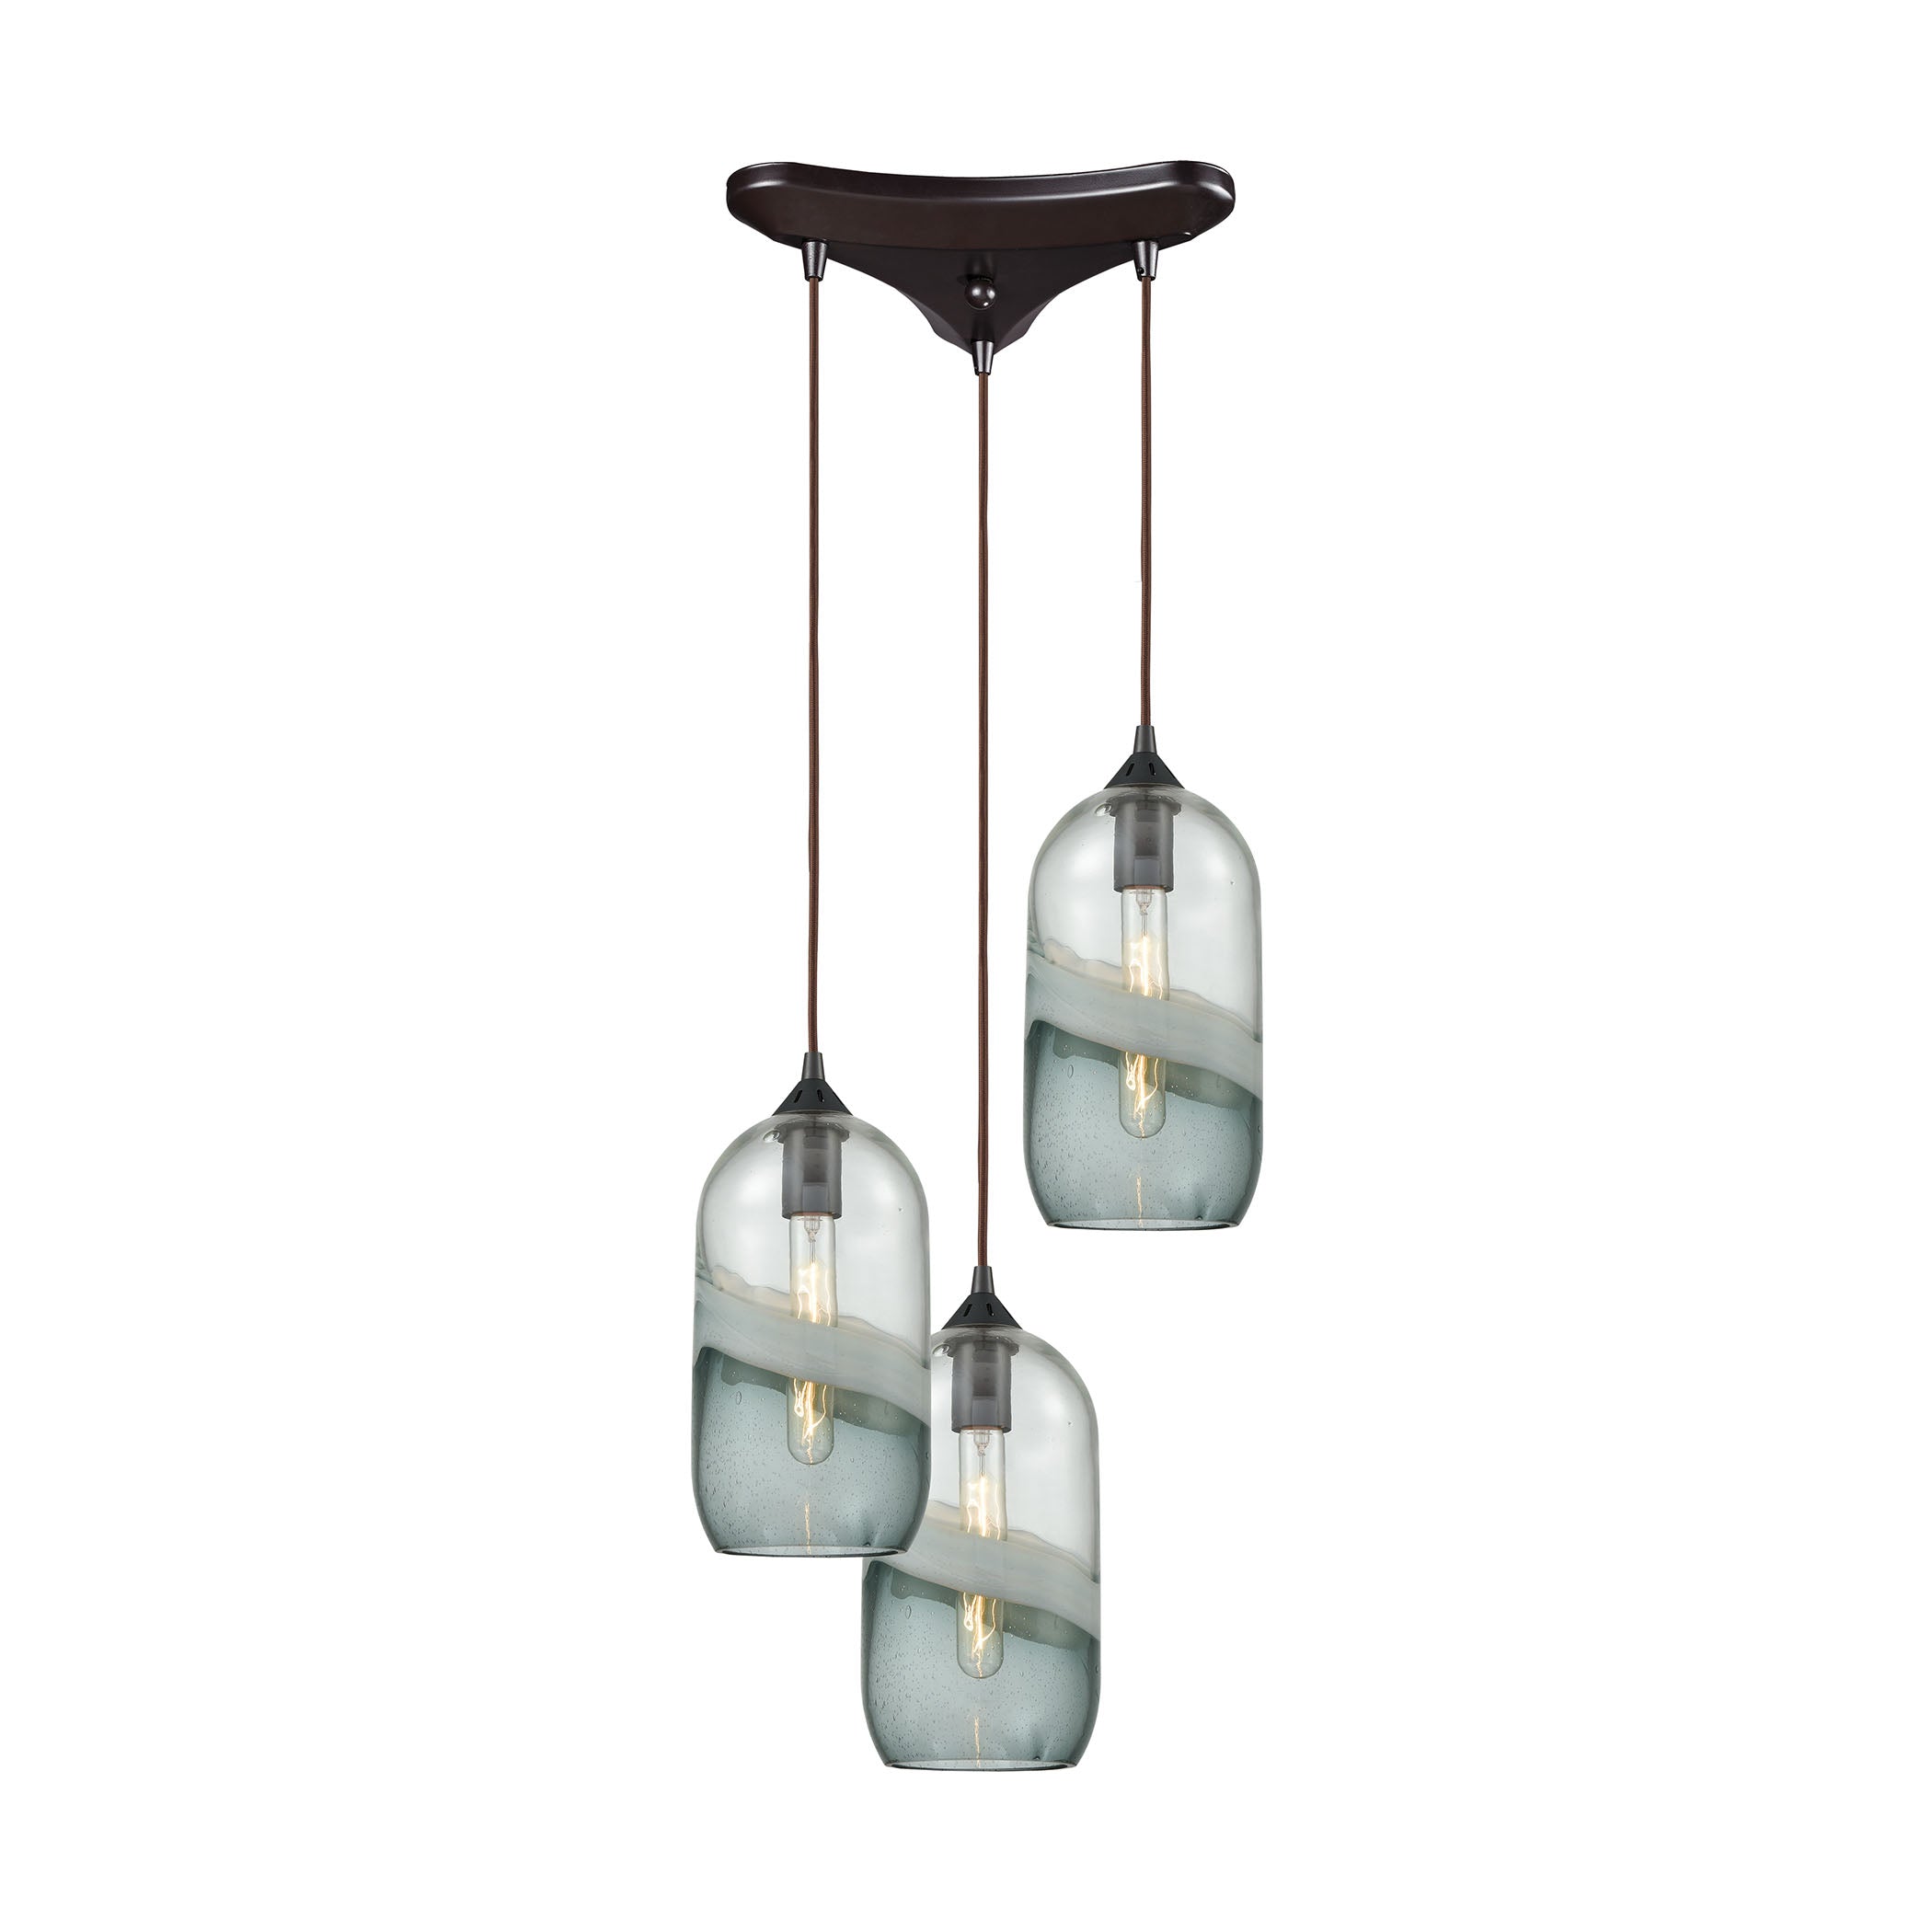 ELK Lighting 25102/3 Sutter Creek 3-Light Triangular Pendant Fixture in Oiled Bronze with Clear and Smoke Seedy Glass